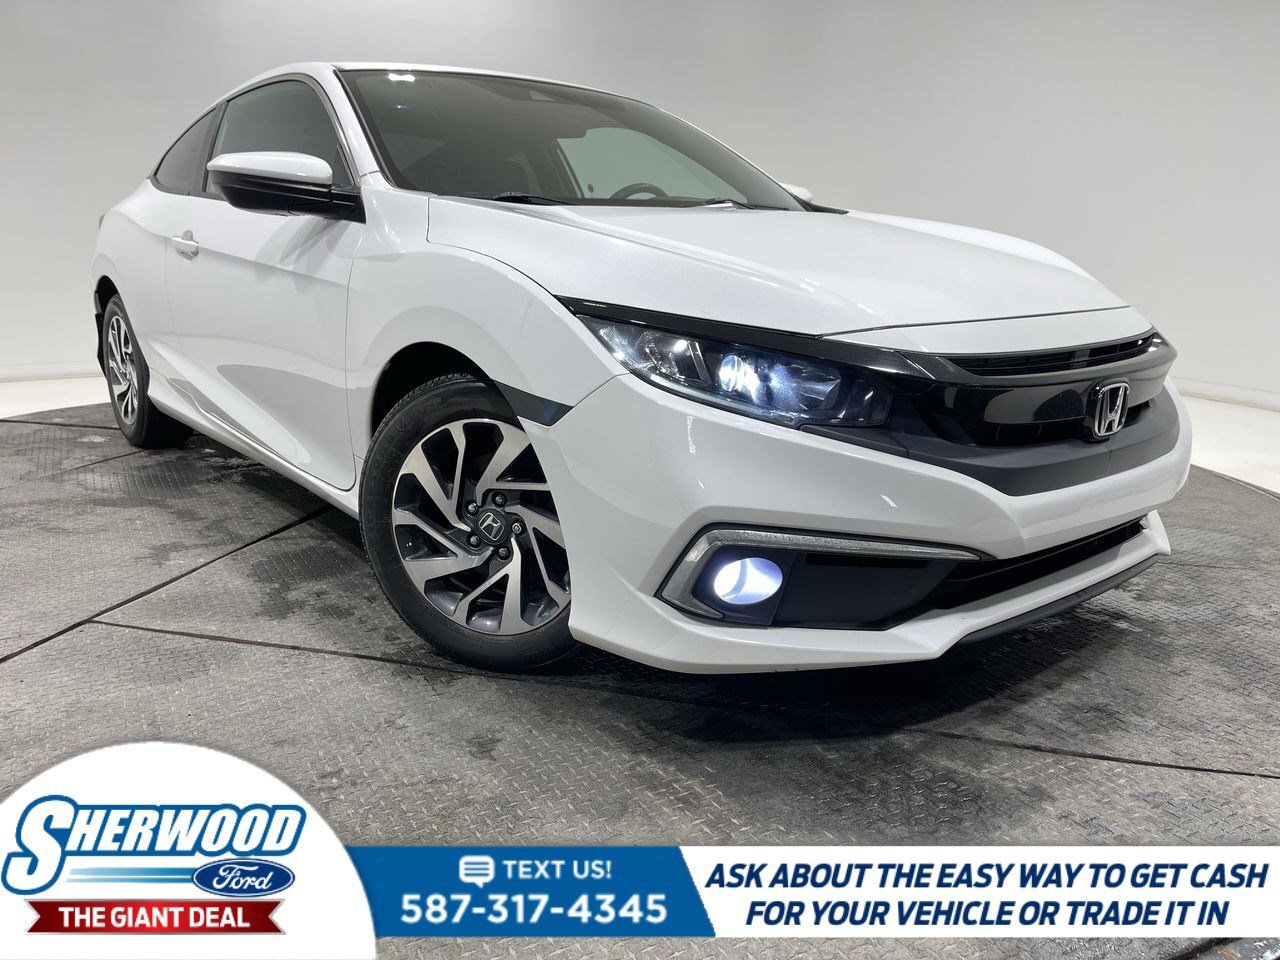 2019 Honda Civic Coupe LX- $0 Down $107 Weekly